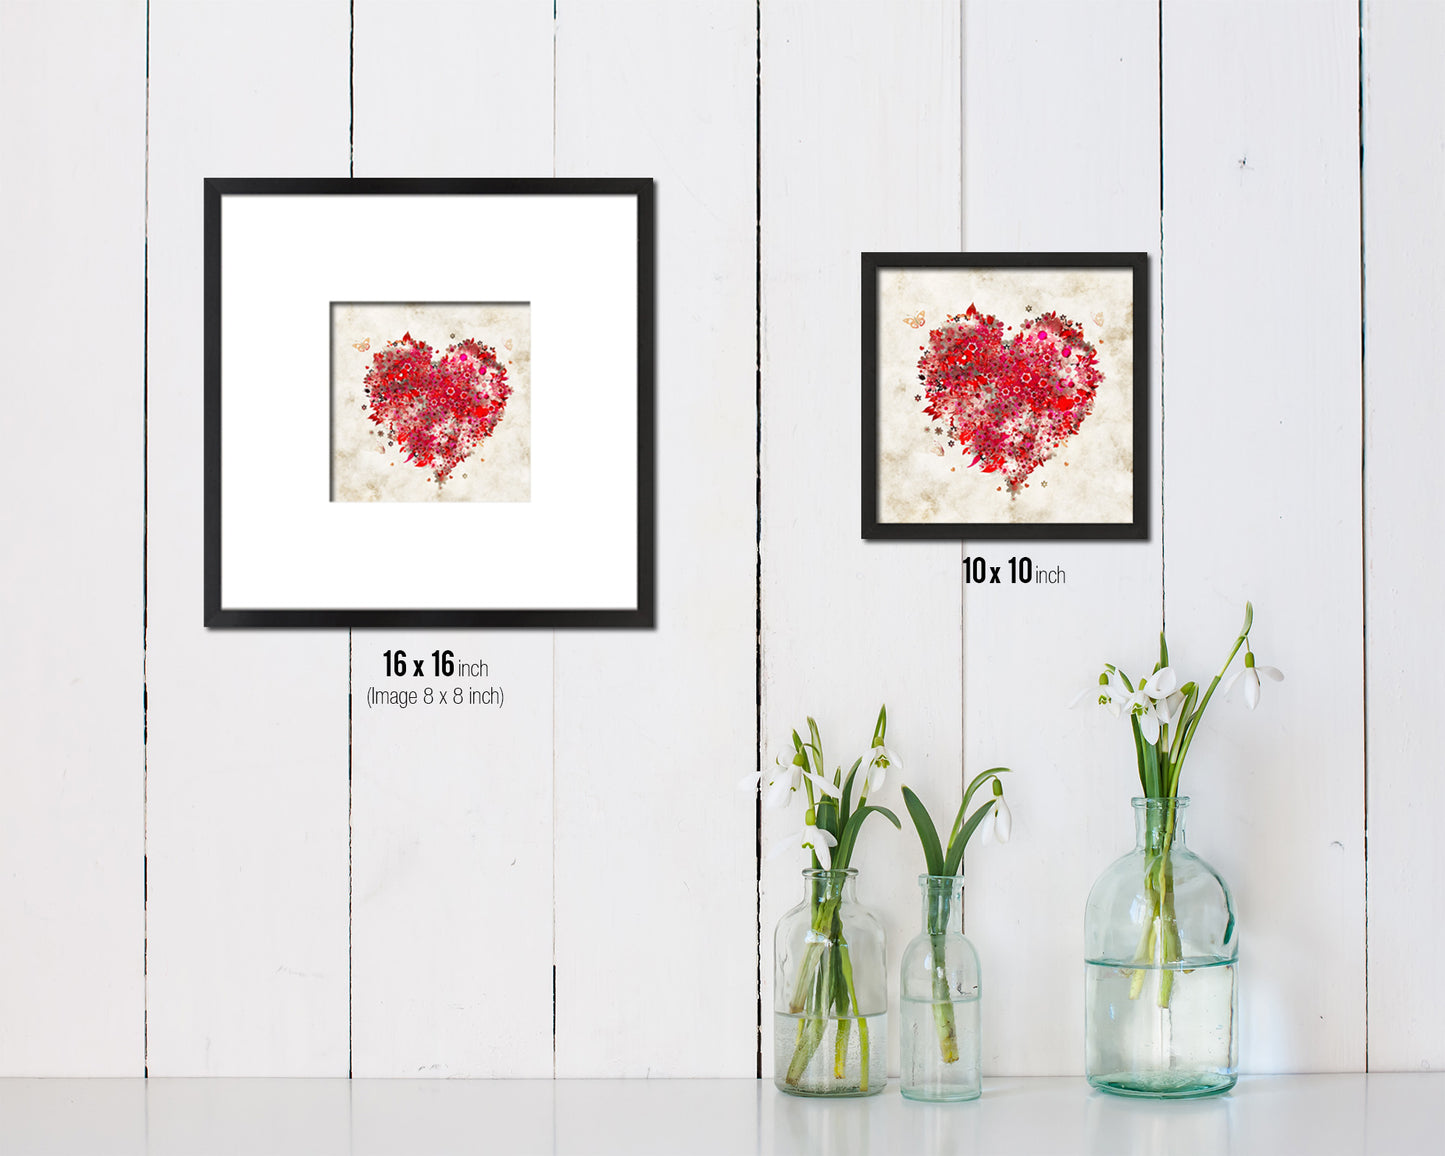 Heart Red Punctuation Symbol Framed Print Home Decor Wall Art English Teacher Gifts